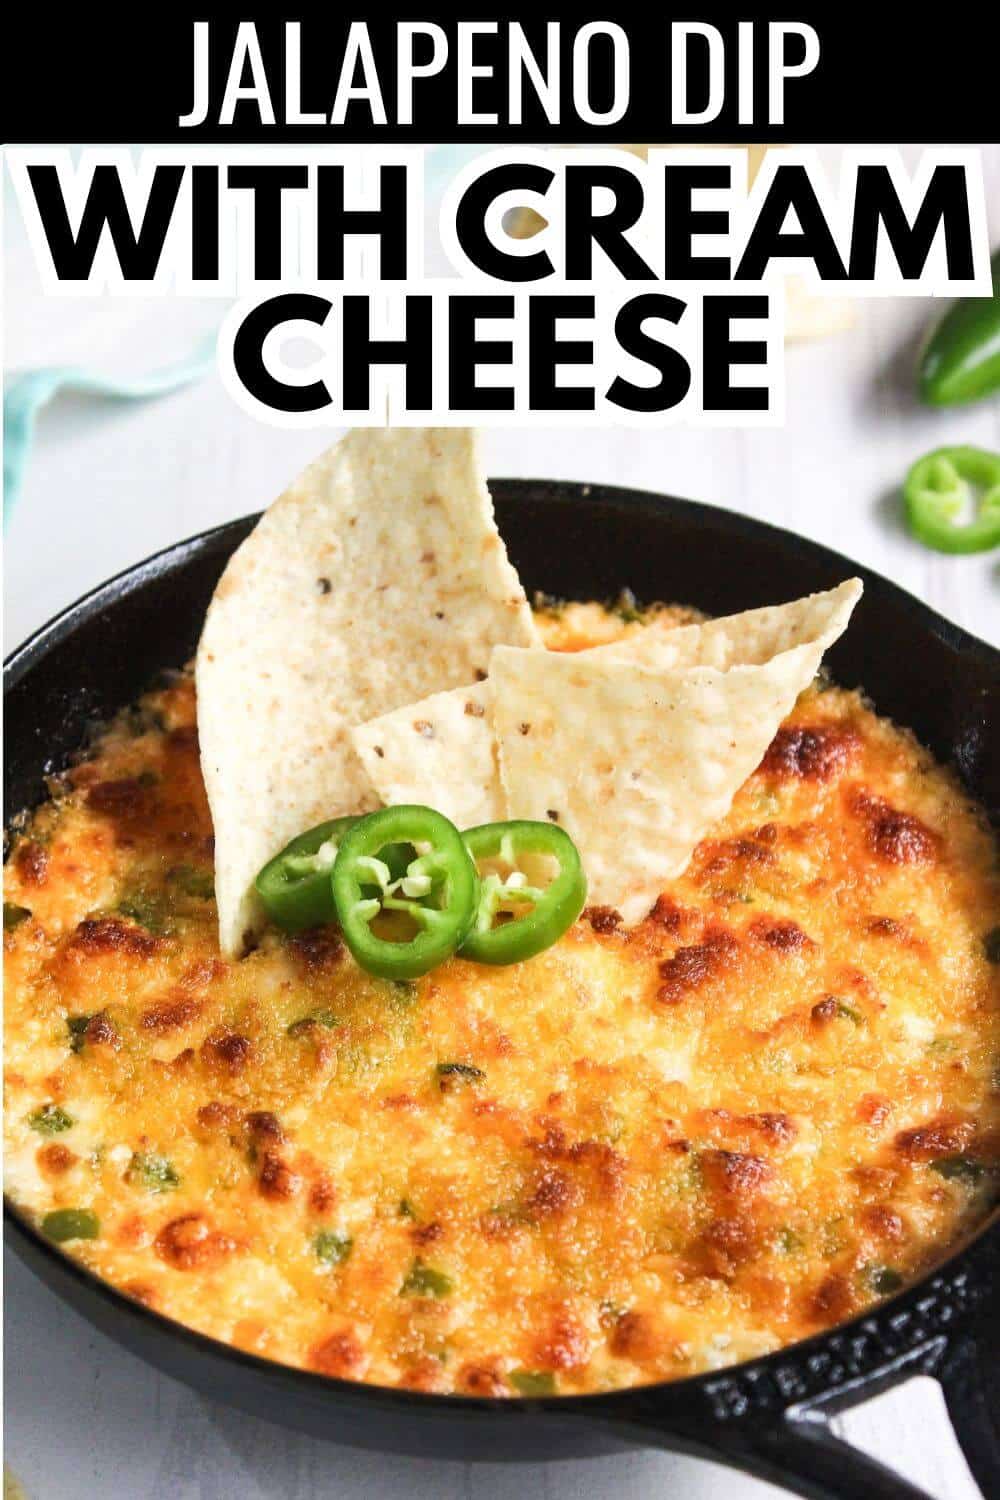 Jalapeno dip with cream cheese in a skillet.